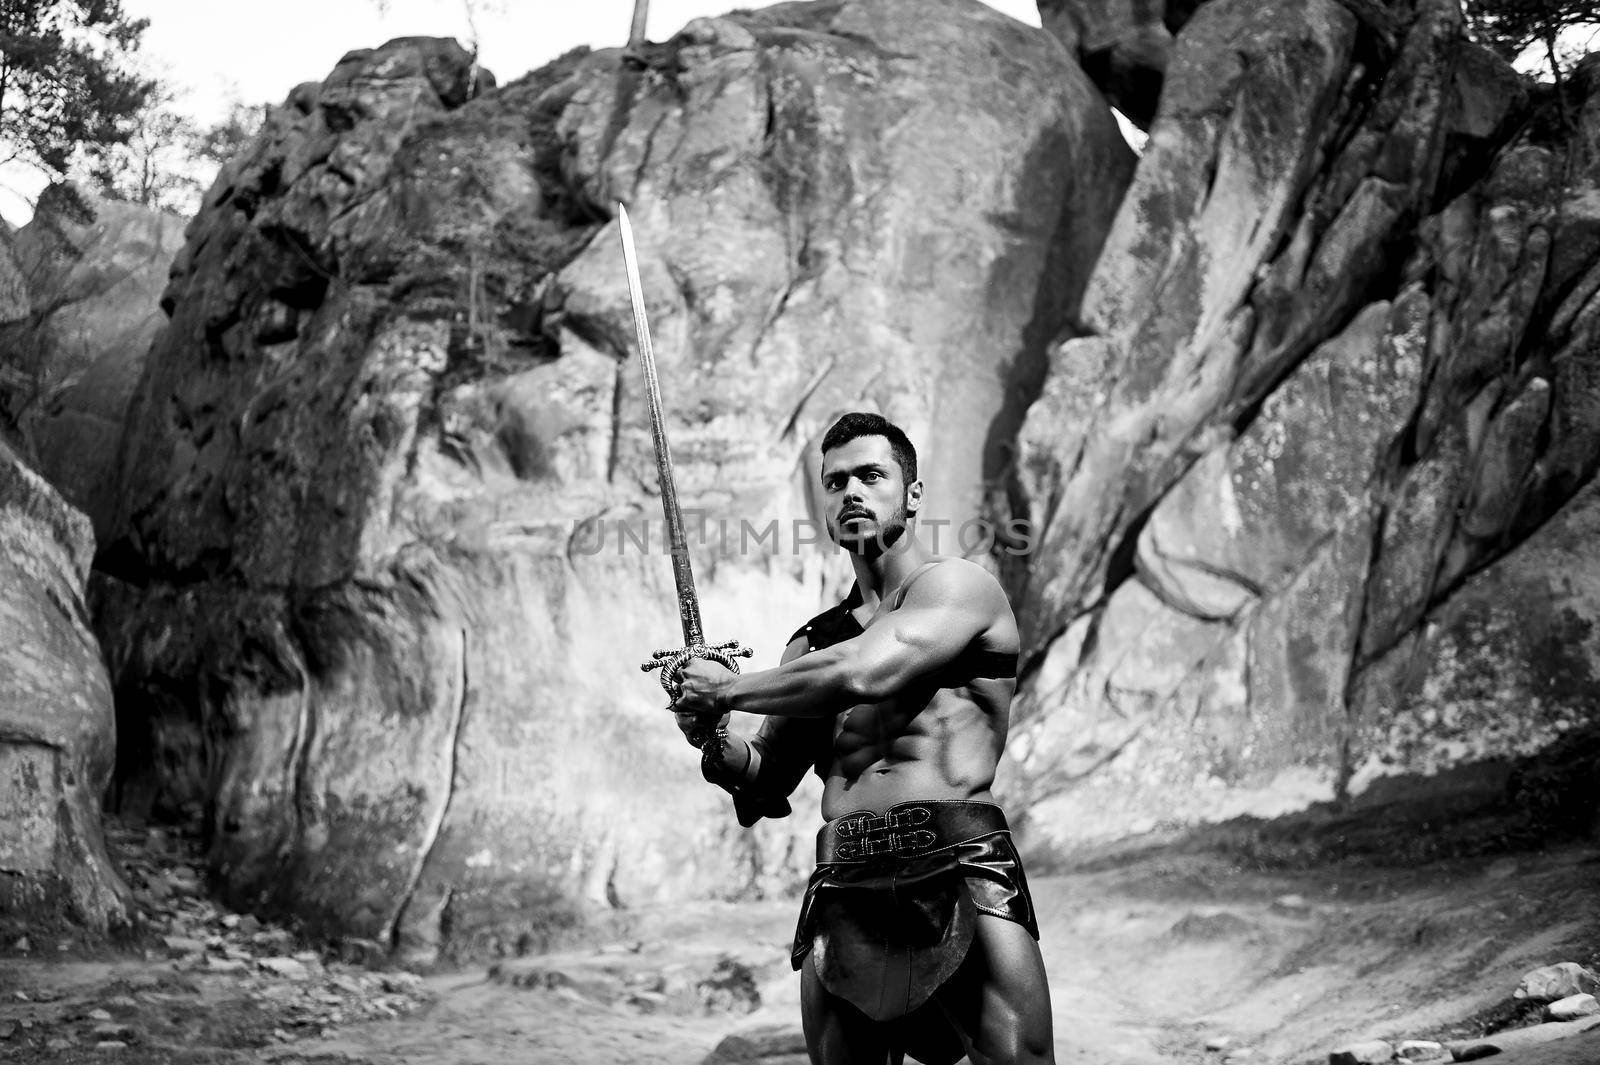 Getting ready for his battle. Monochrome portrait of a courageous manly warrior with a sword posing bravely near the rocks